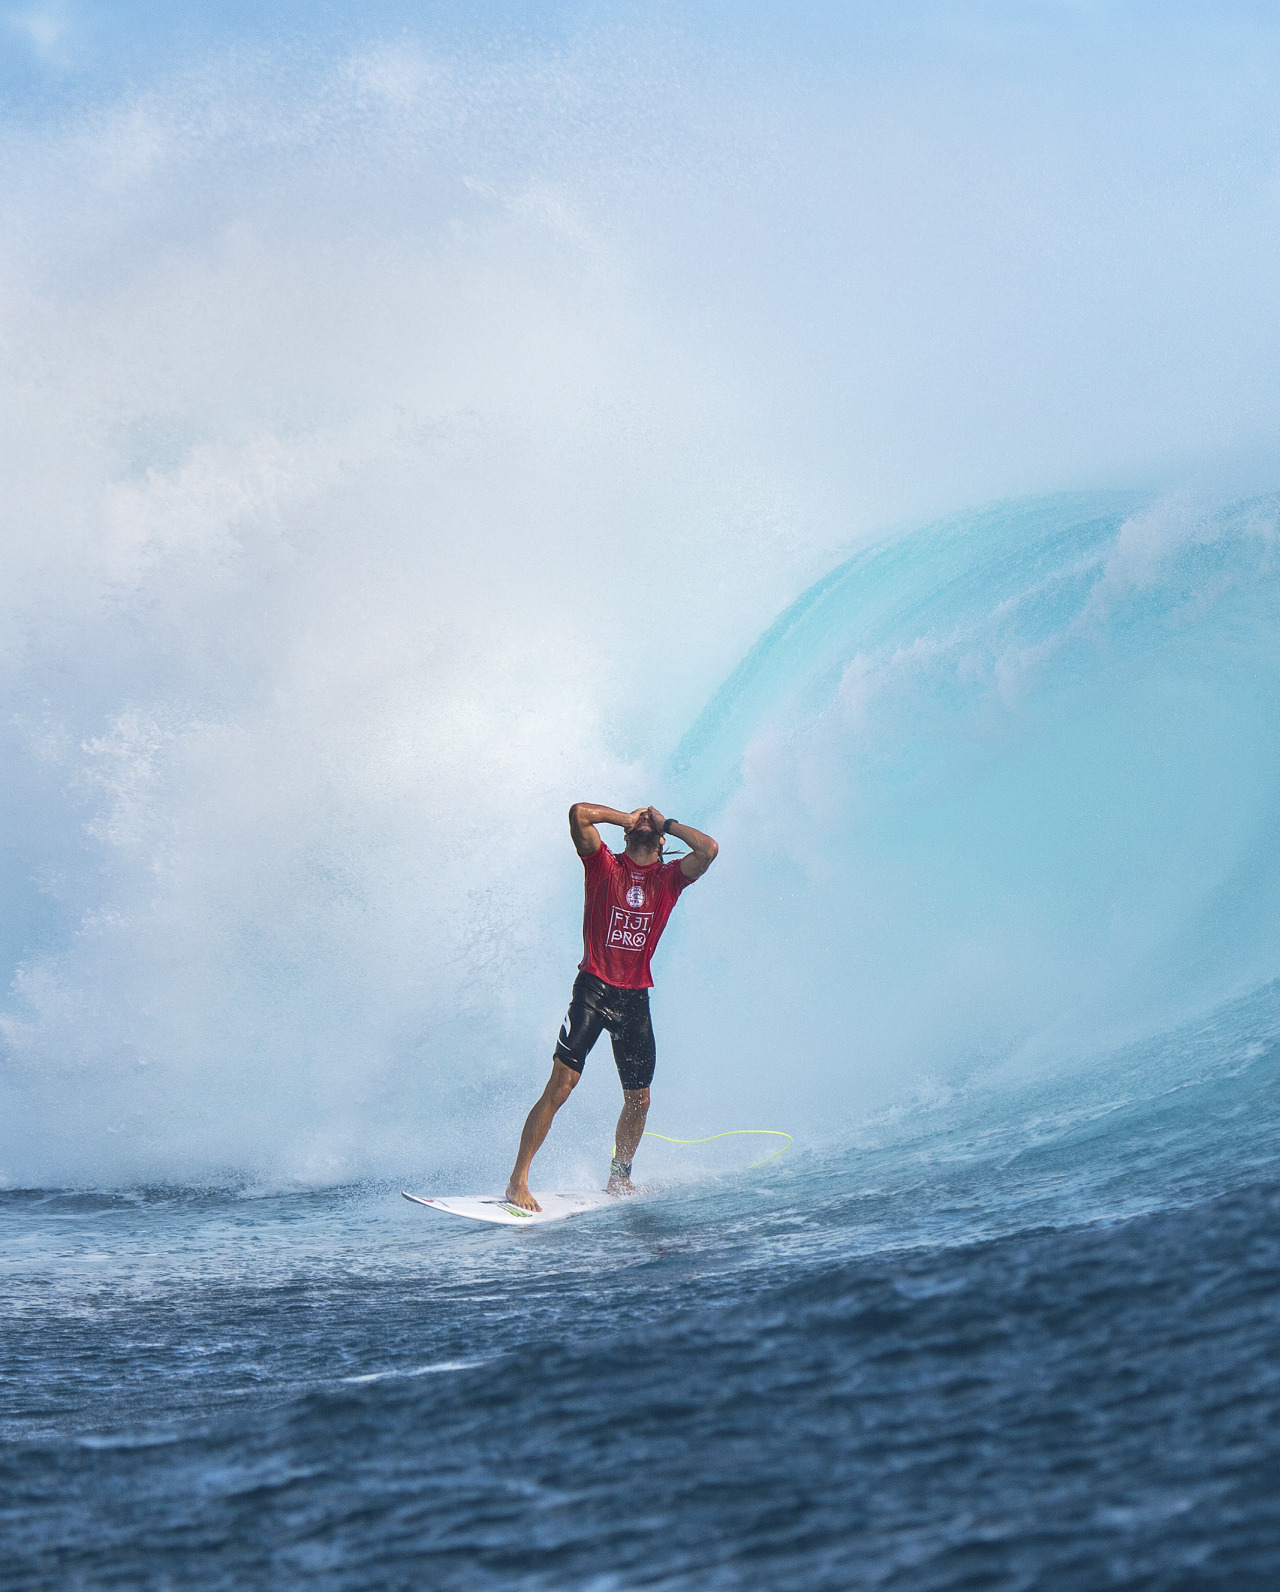 Owen Wright of South Coast, NSW, Australia (pictured) holds his head in disbelief after emerging from his second Perfect 10 point ride at the Fiji Pro at Cloudbreak on Monday June 15, 2015. Owen produced a flawless performance during Round 5, riding a pair of Perfect rides for a heat total of 20.00 (out of a possible 20.00).